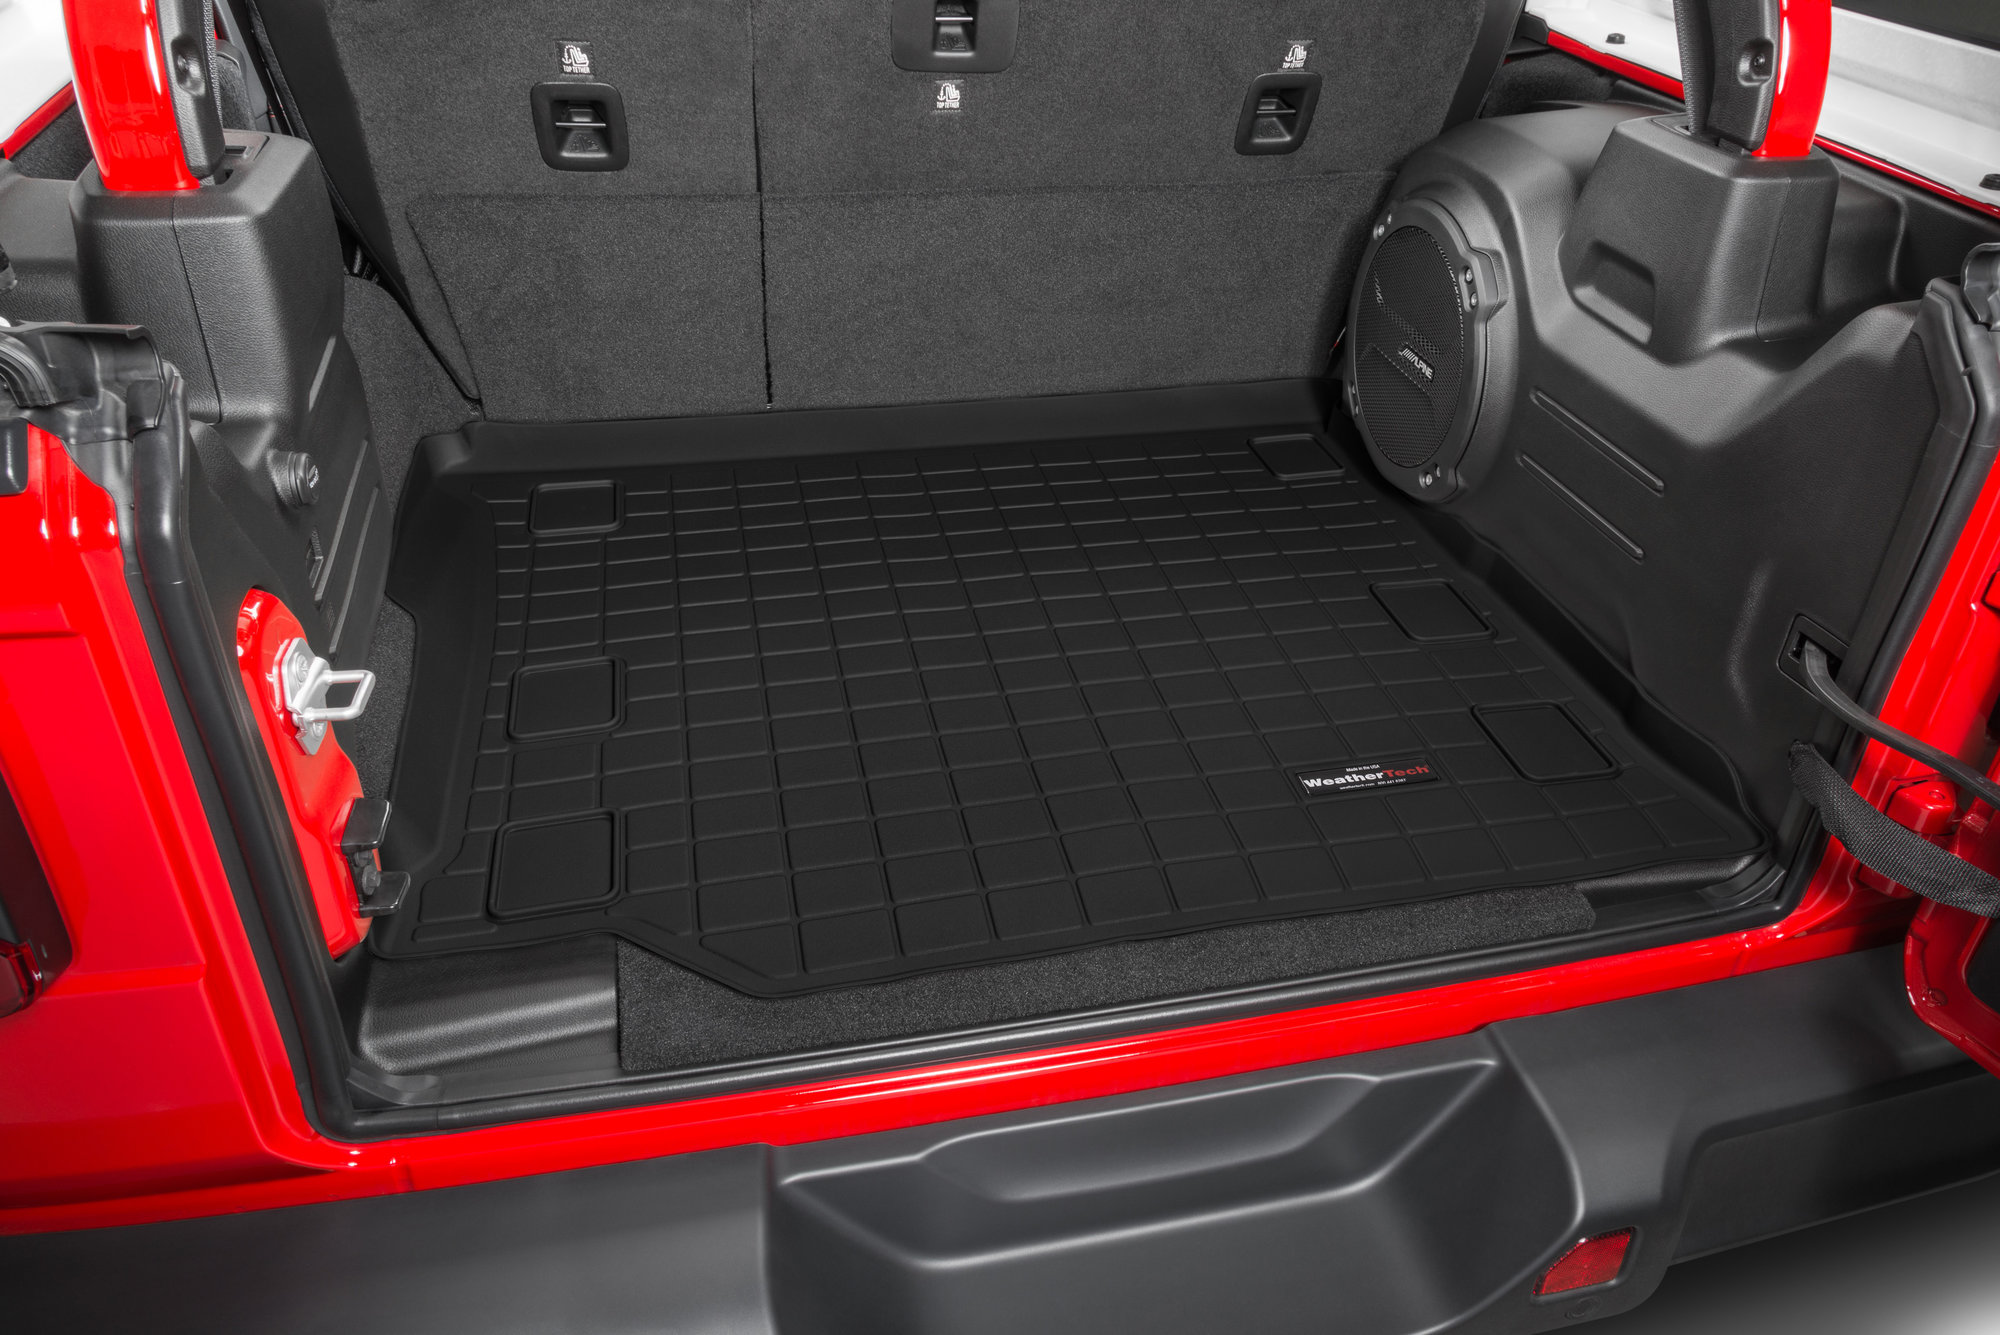 WeatherTech Rear Cargo Liner in Black for 18-21 Jeep Wrangler JL Unlimited  with Leather Seats Quadratec